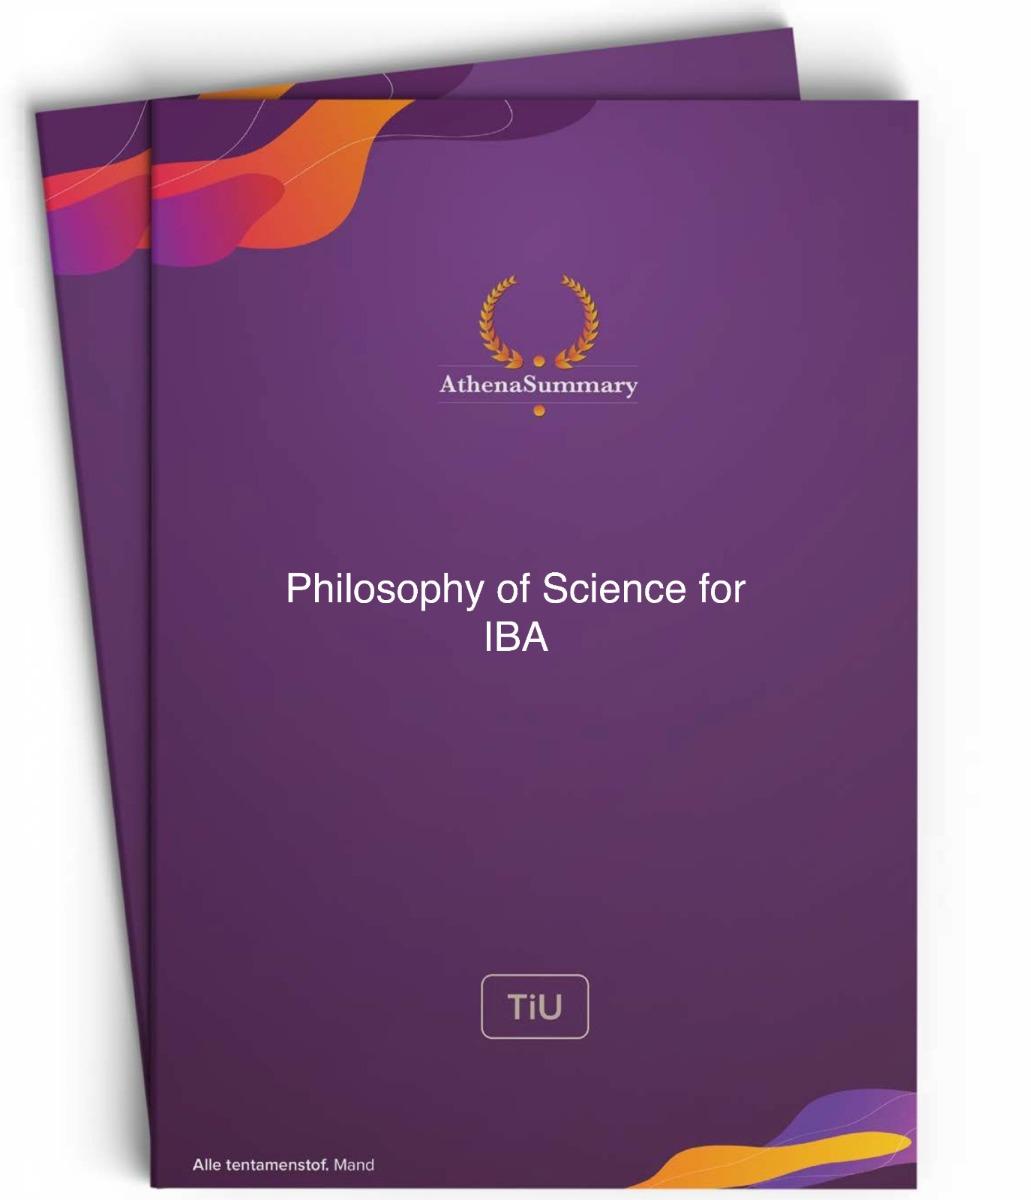 Literature and Lecture Summary: Philosophy of Science for IBA